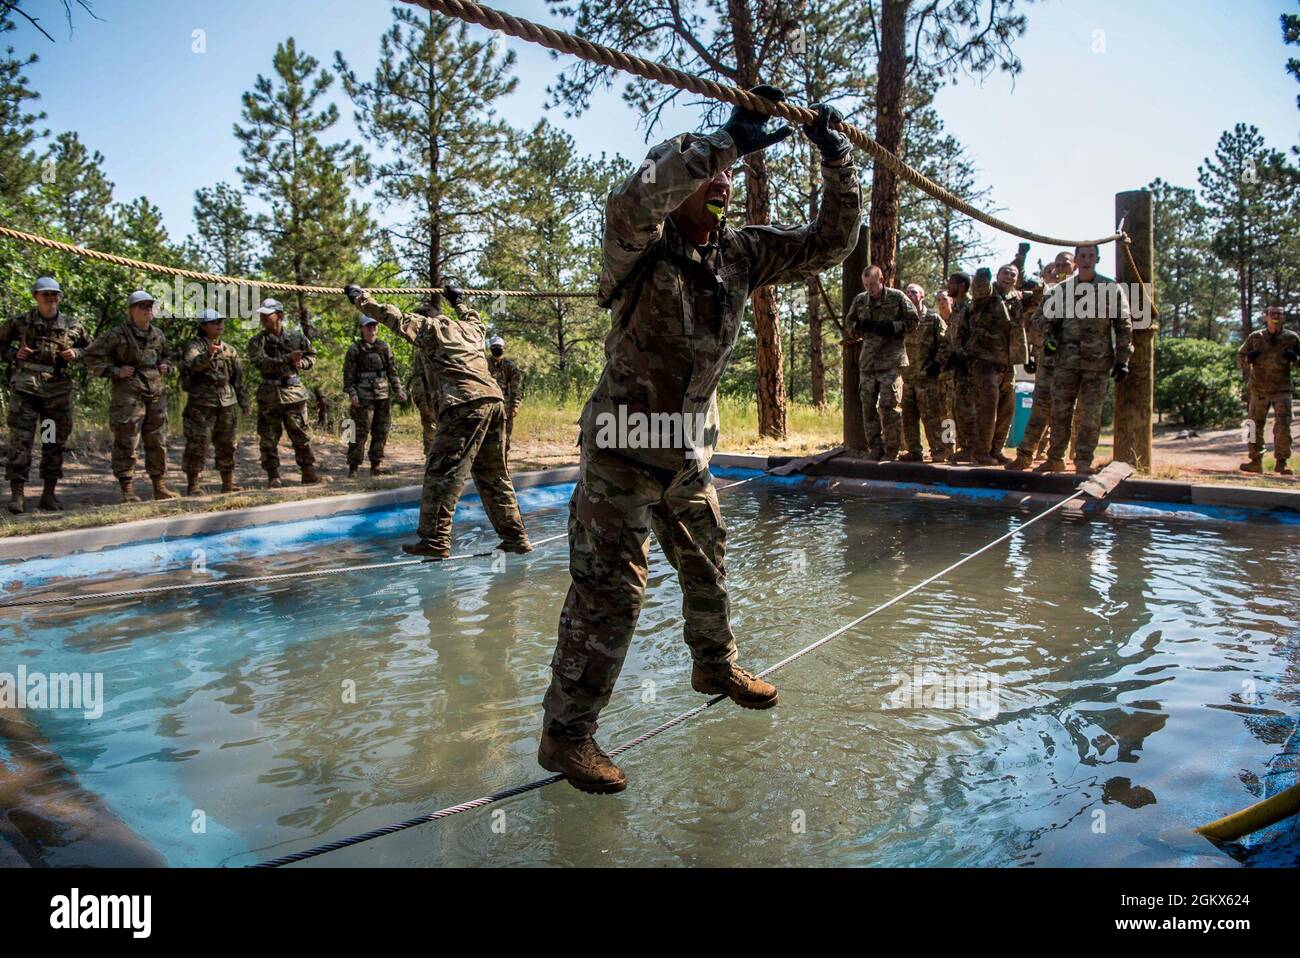 U.S. AIR FORCE ACADEMY, Colo. – Basic cadets from the Class of 2025 complete the obstacle course at the U.S. Air Force Academy's Jacks Valley in Colorado Springs, Colo., on July 15, 2021. Basic Cadet Training (BCT) is a six-week indoctrination program to guide the transformation of new cadets from being civilians to military academy cadets prepared to enter a four-year officer commissioning program. Stock Photo